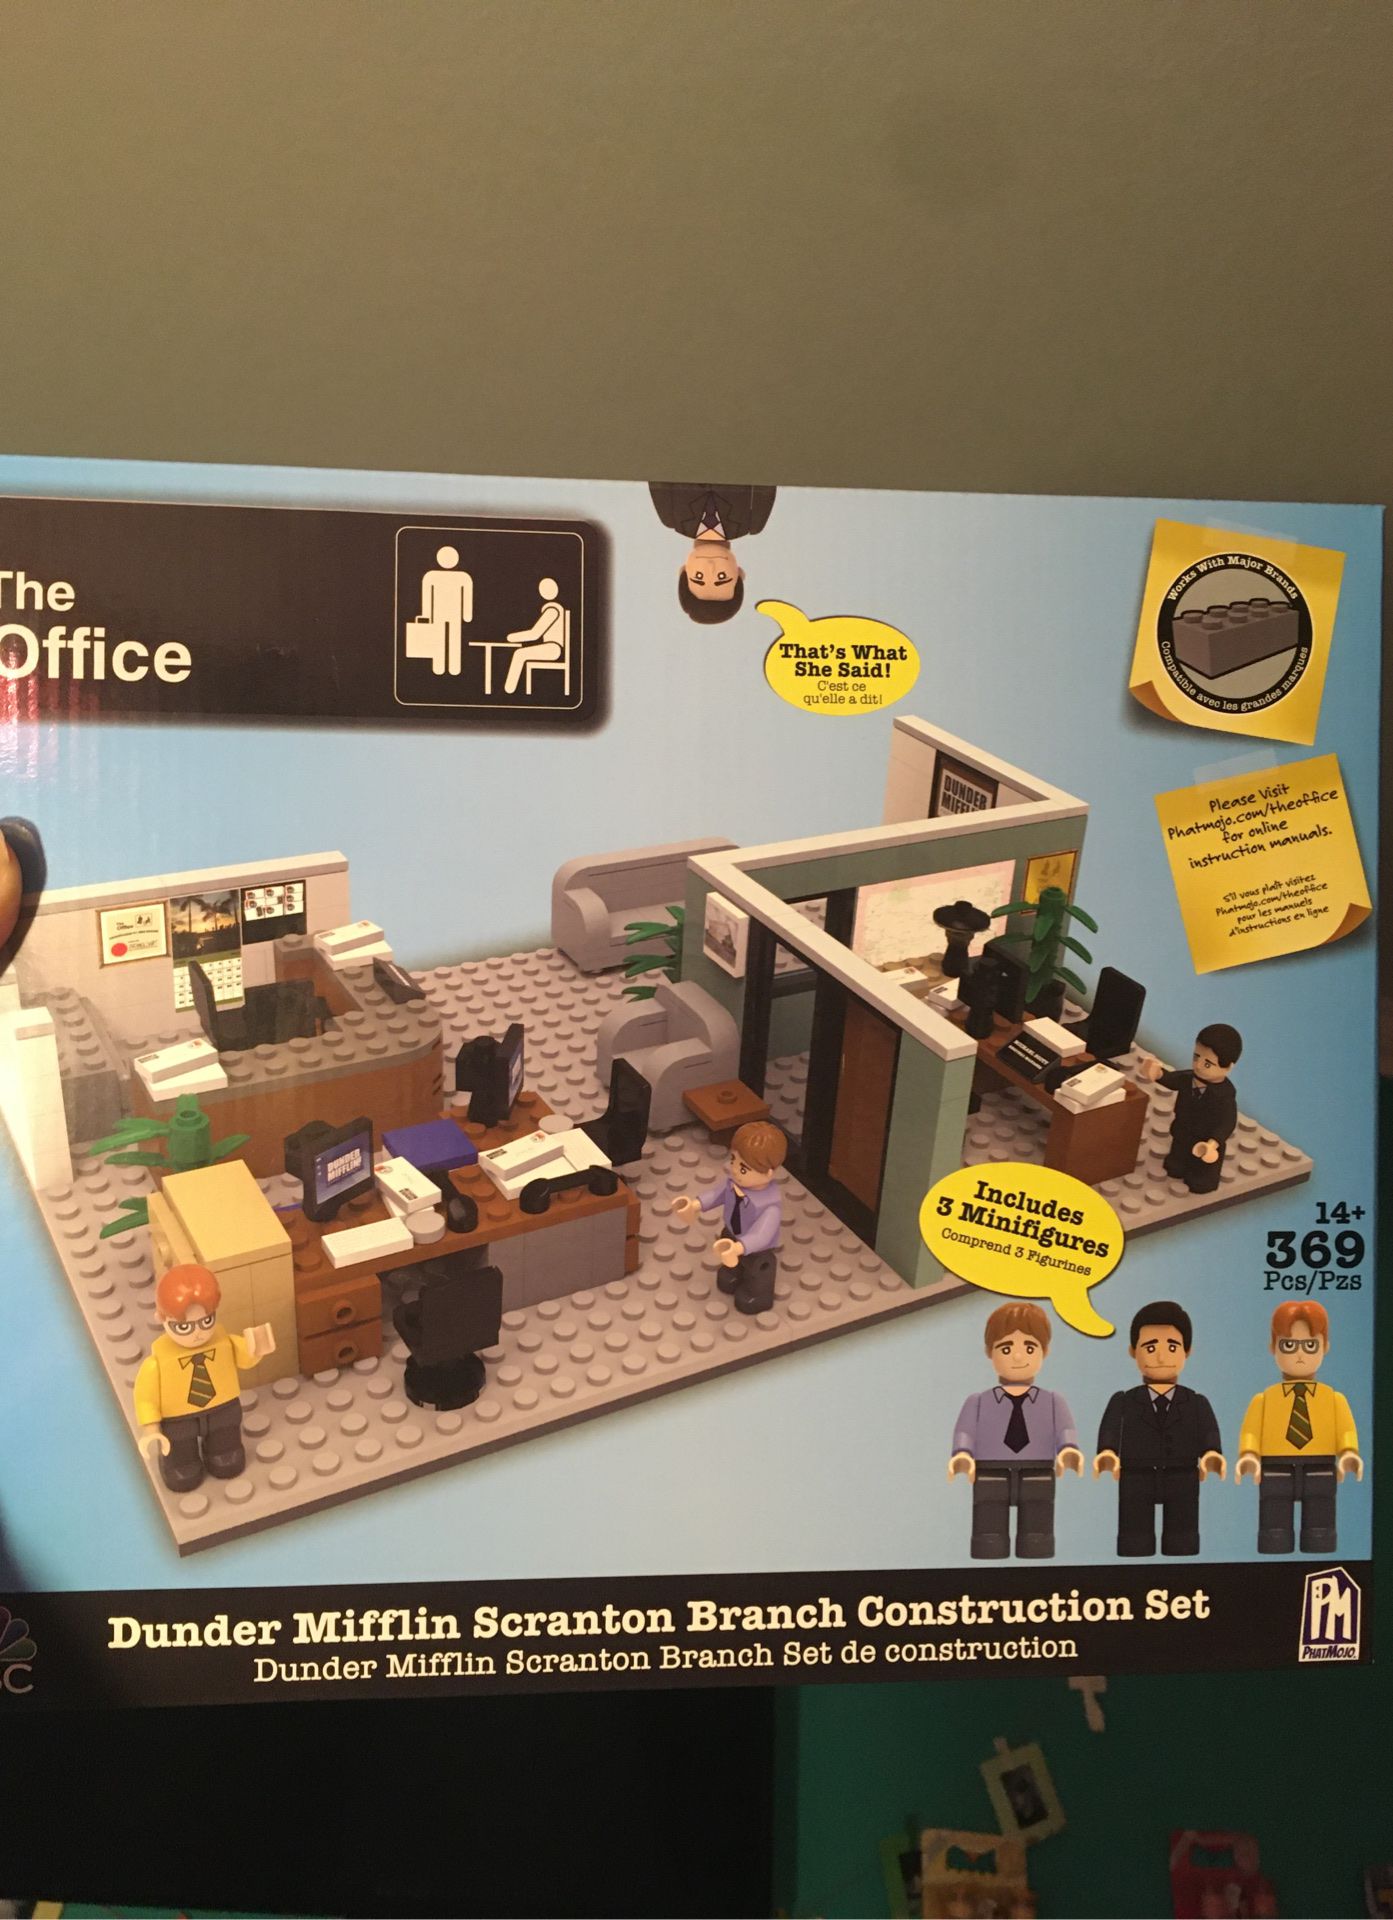 The office Playset!